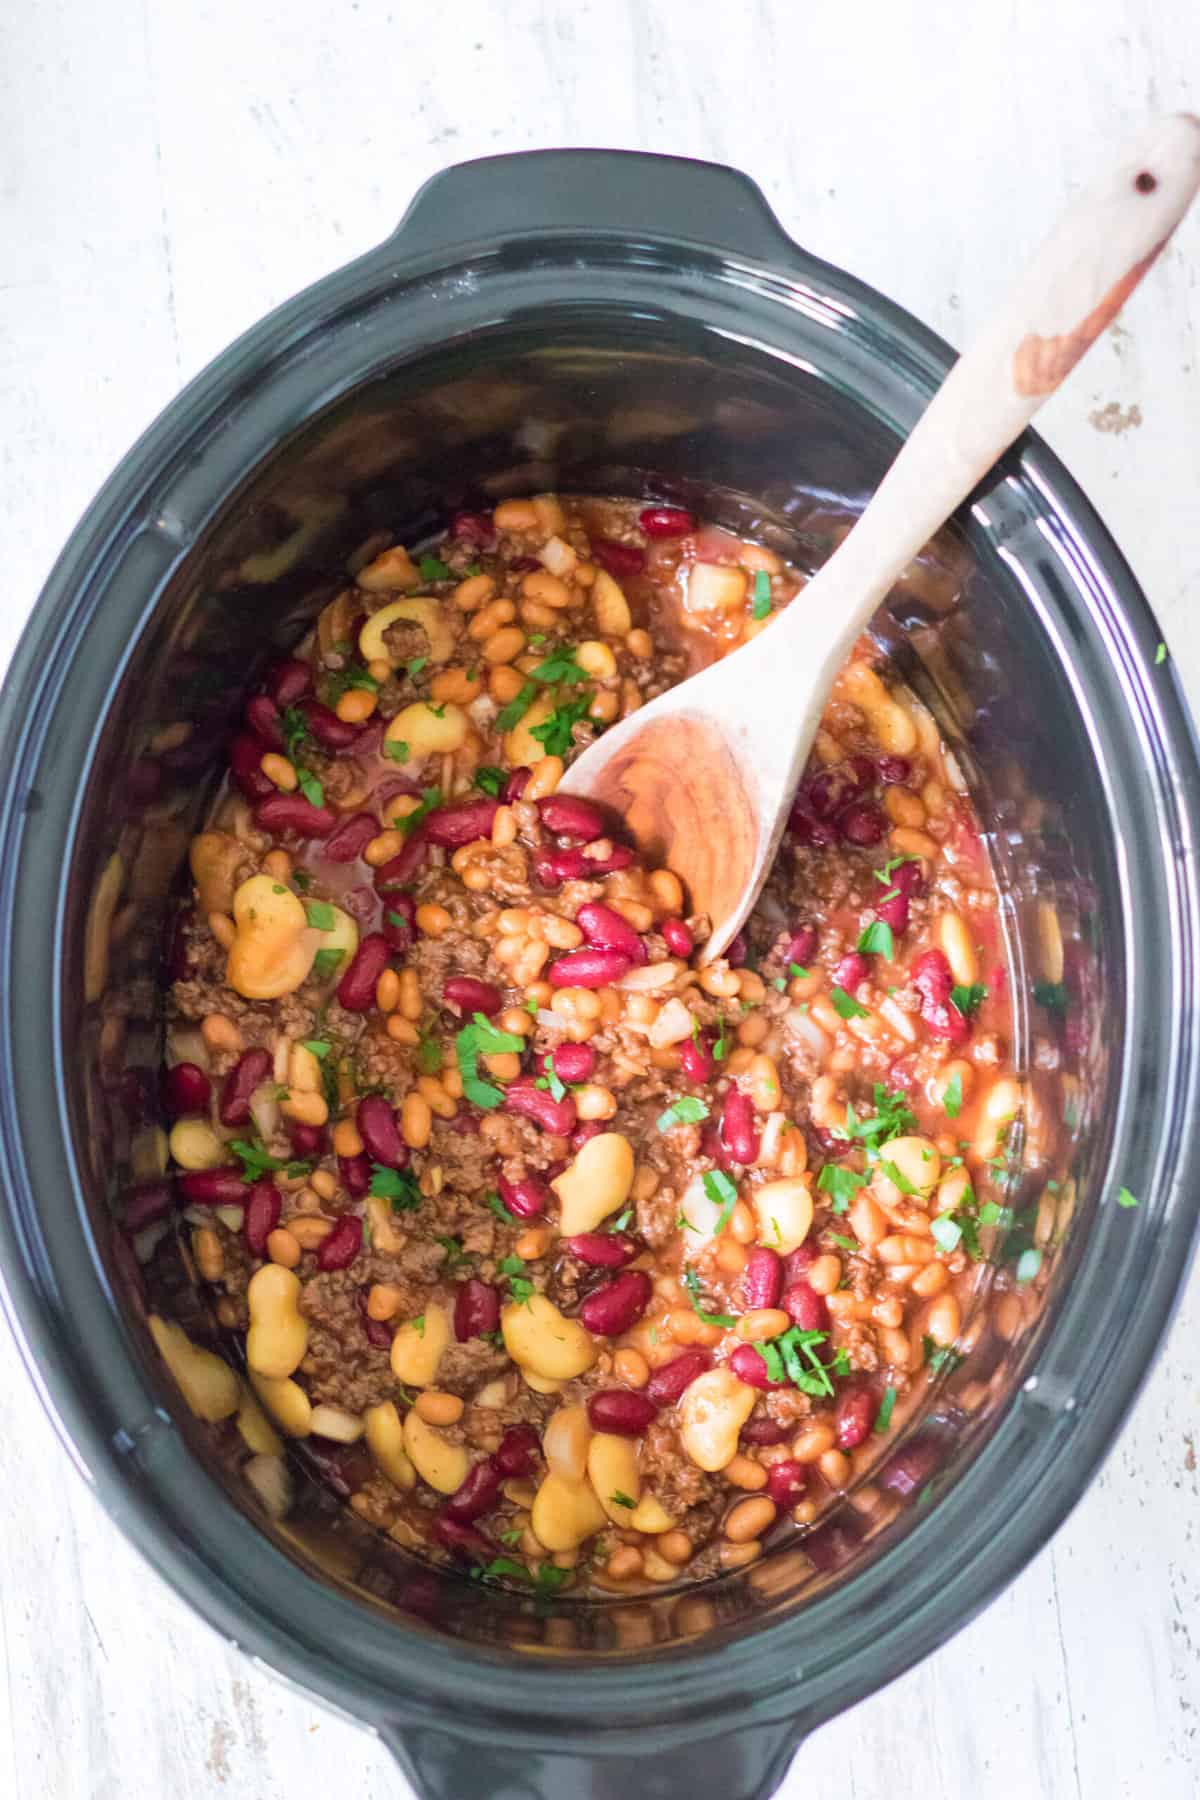 A slow cooker filled with cooked calico beans is being mixed with a wooden stirring spoon.